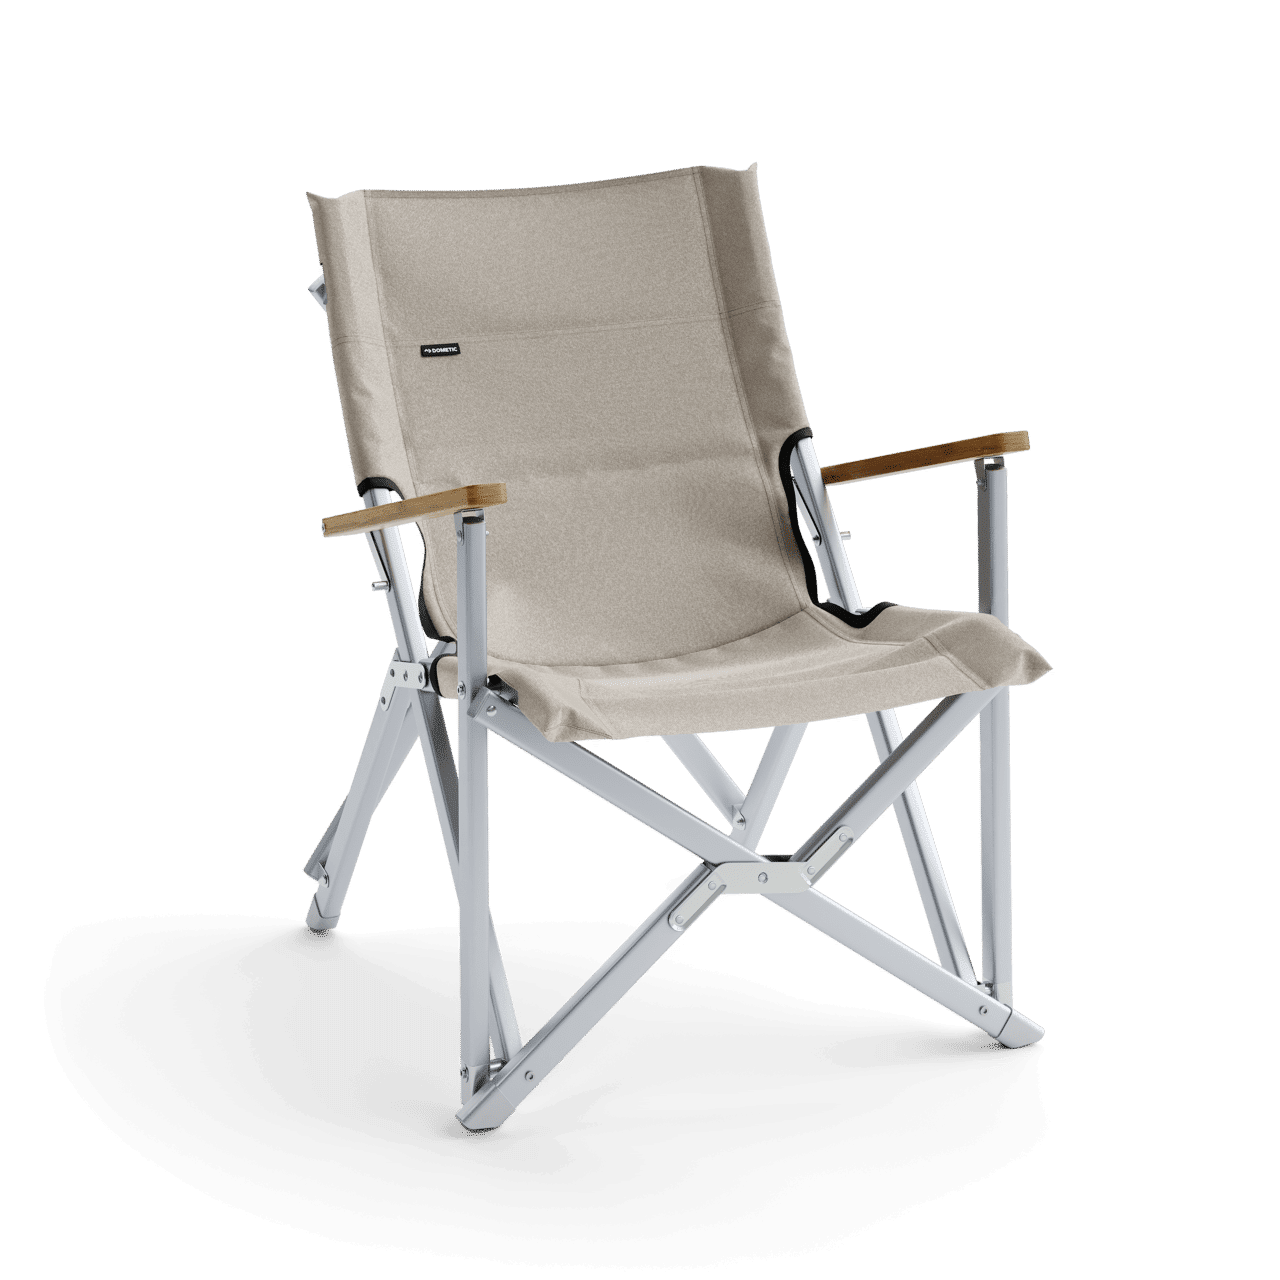 Dometic Compact Camp Chair - Chaise de camping | Hardloop